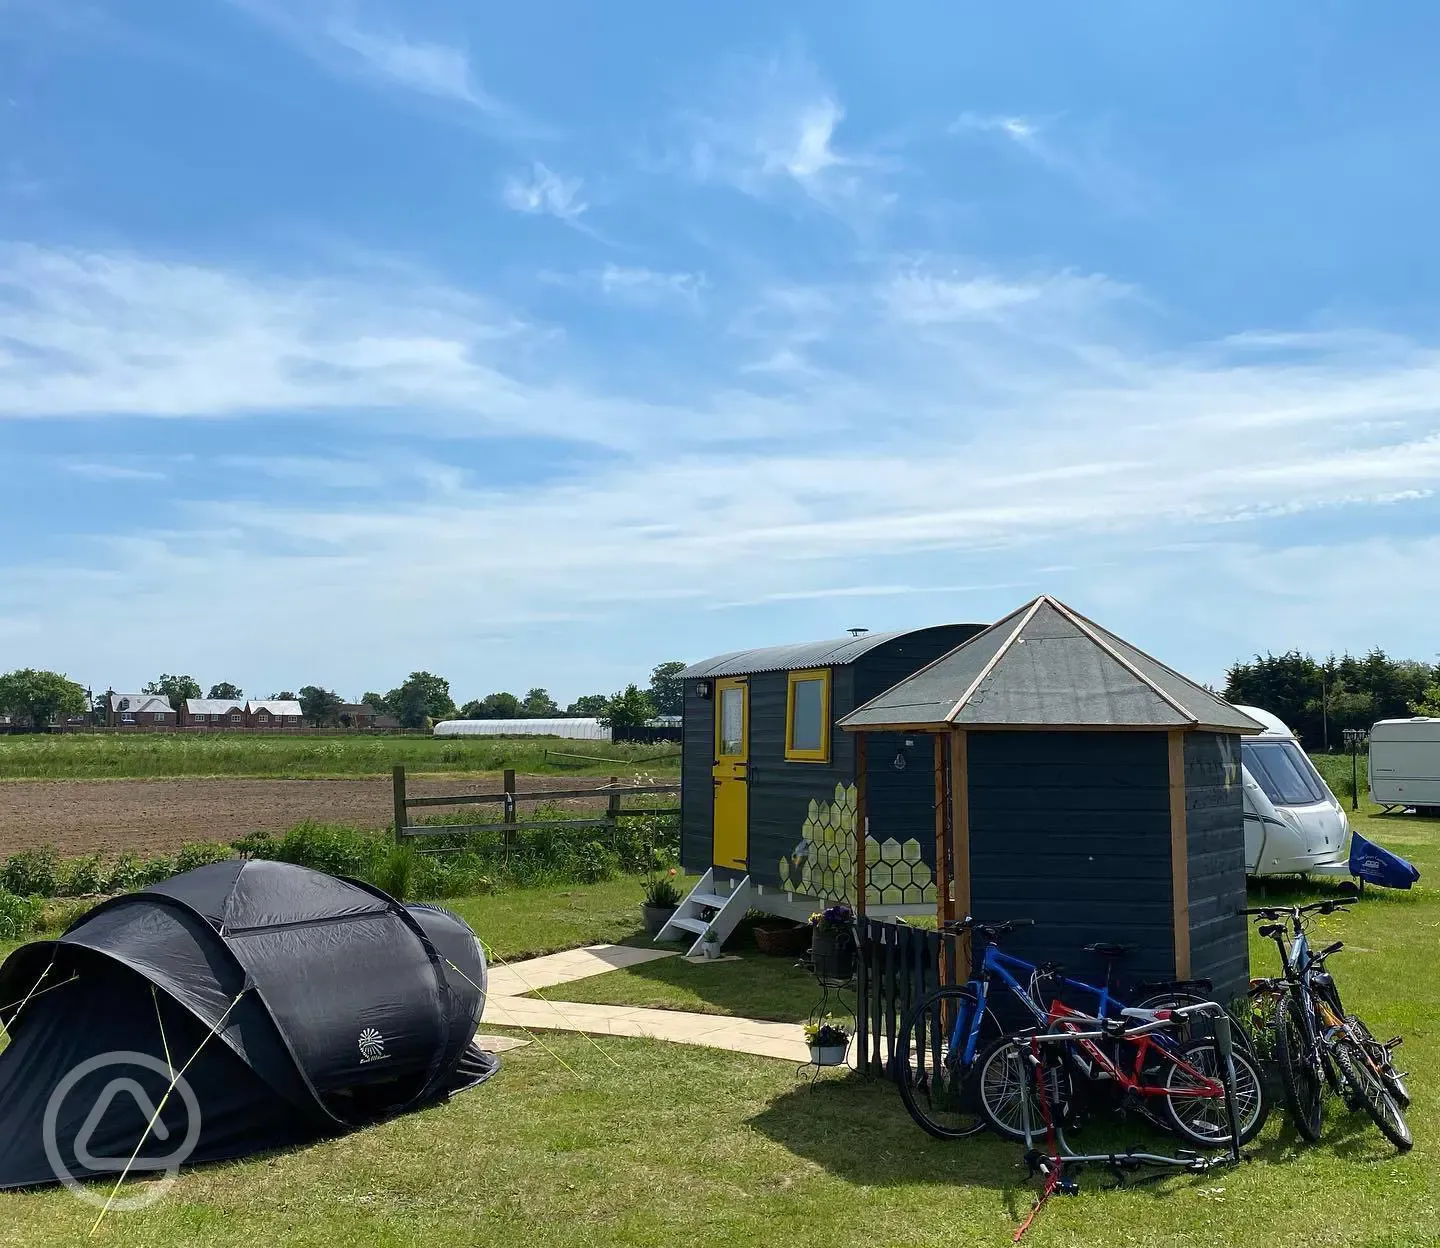 Bumble shepherd's hut and grass pitches